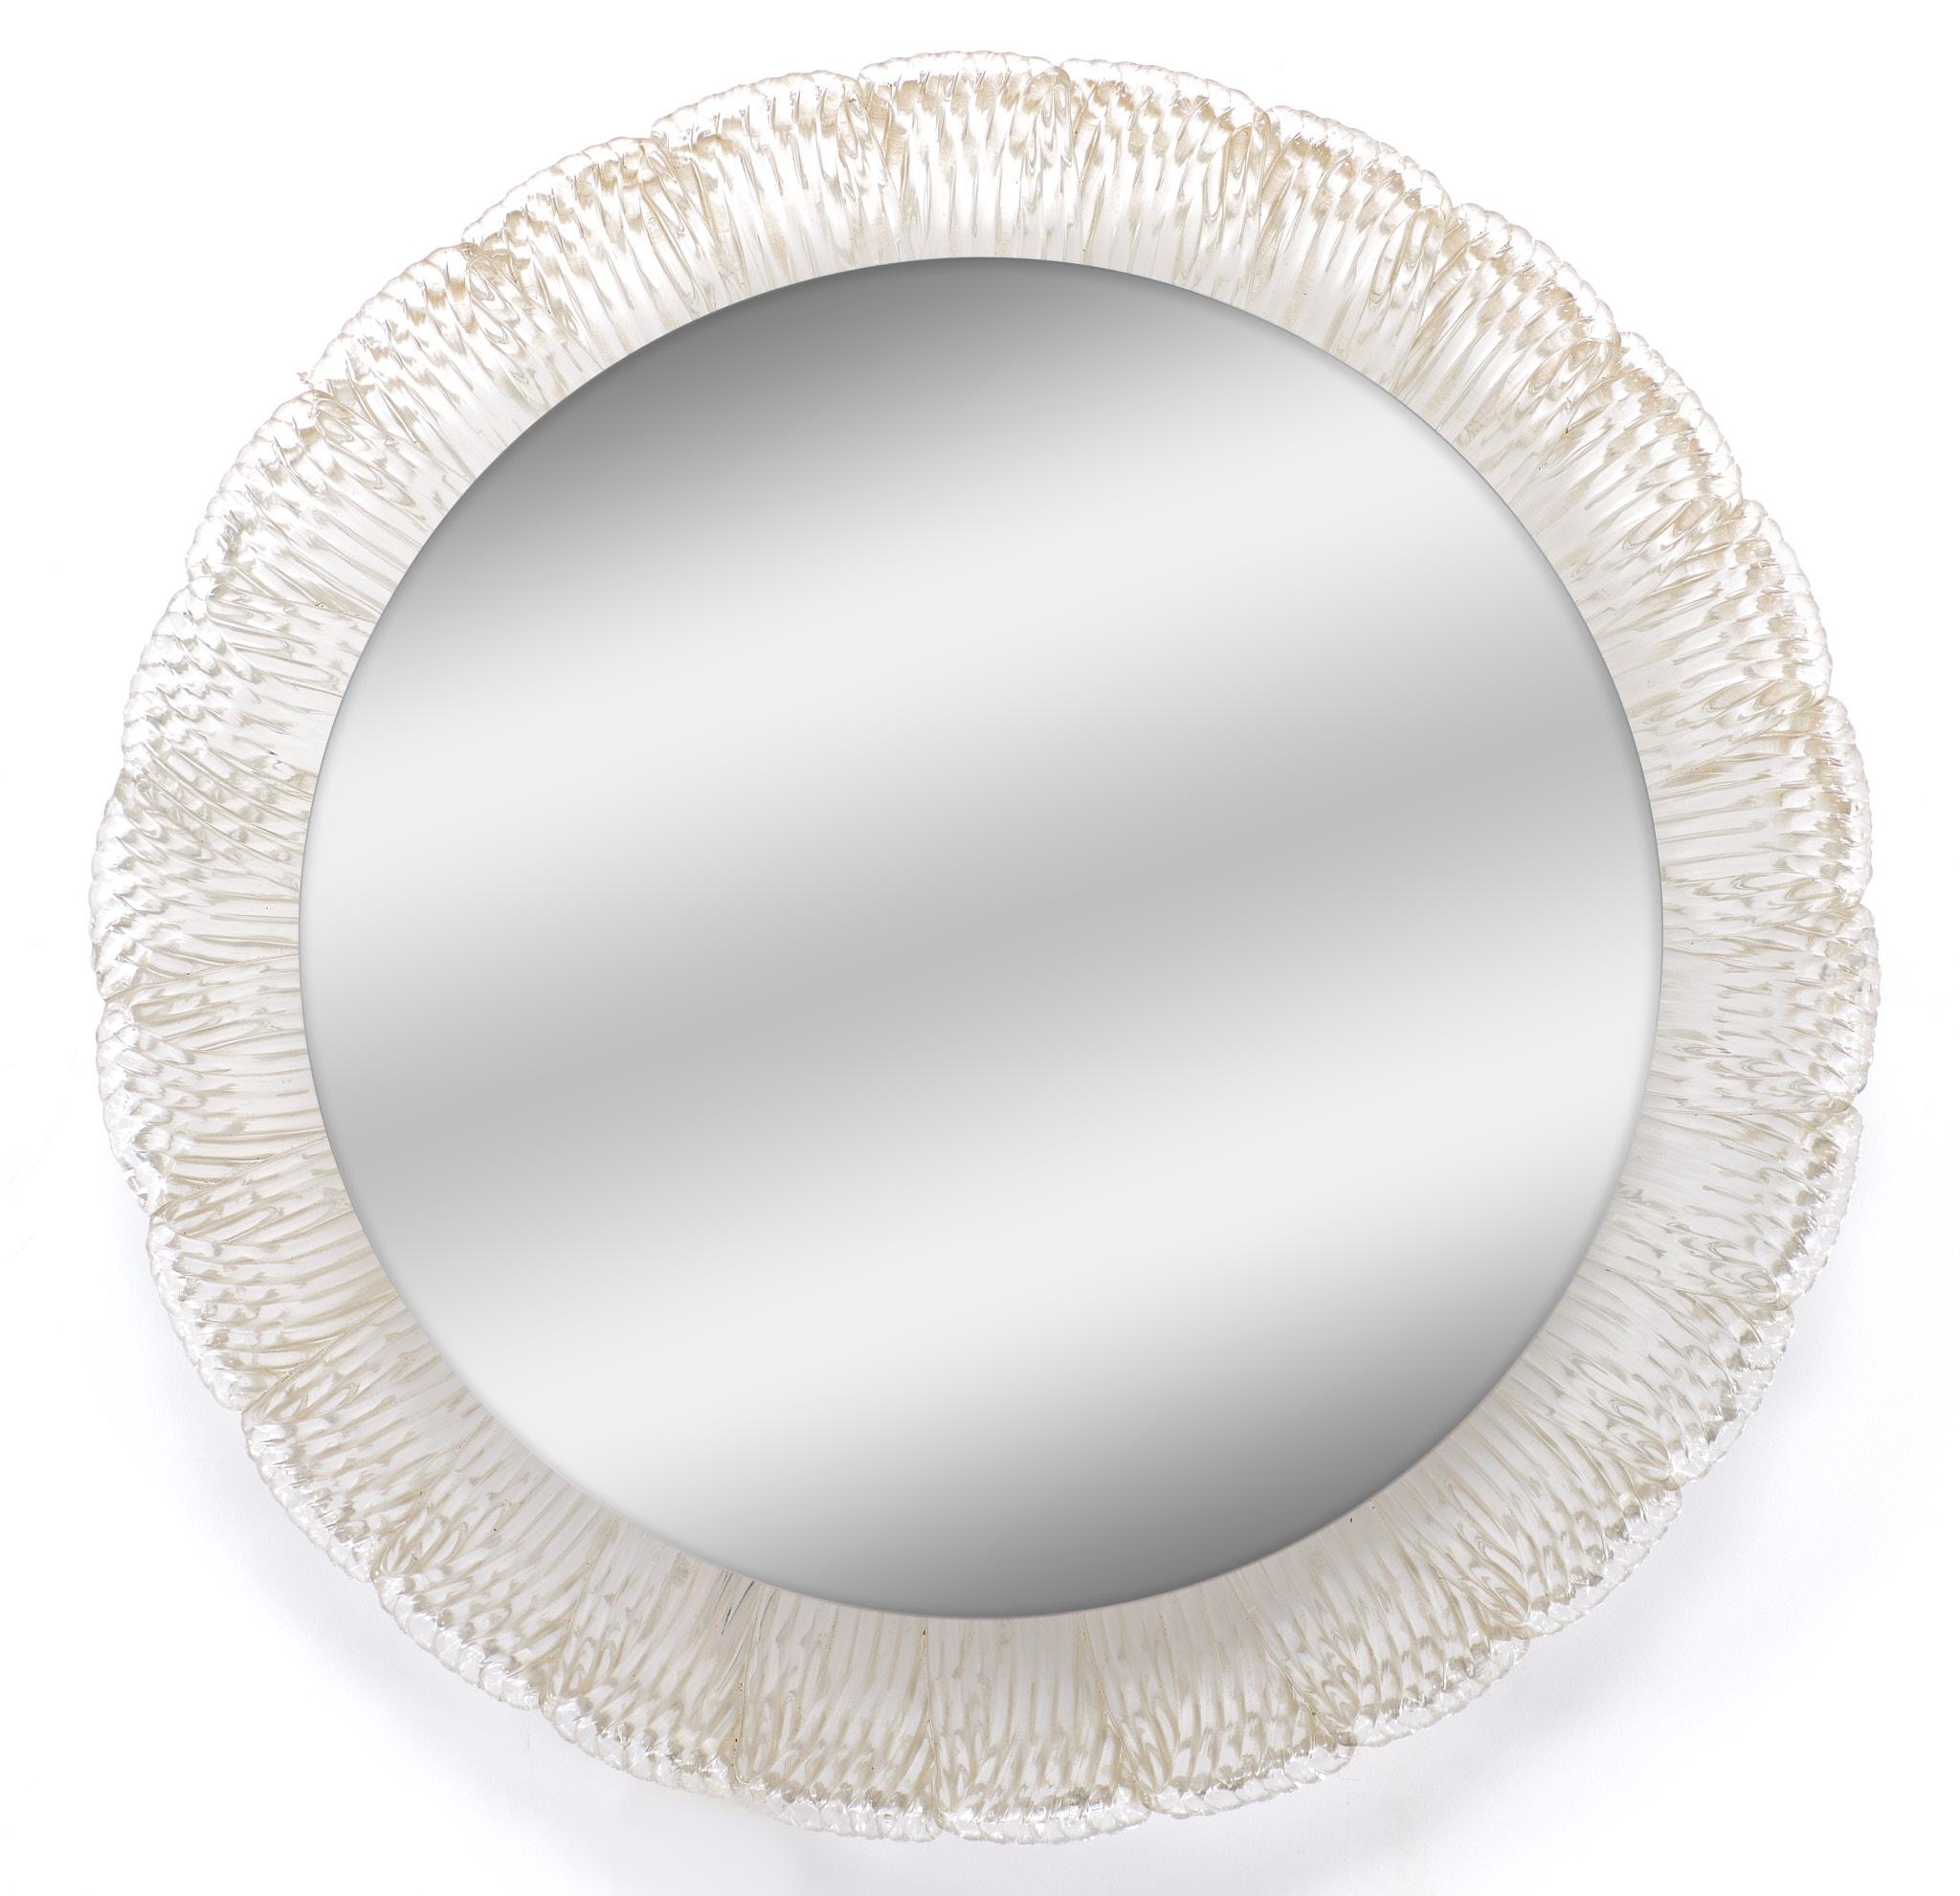 A round backlit mirror mounted on a pleated lucite shell by the renowned German lamp manufacturer, Egon Hillebrand
The design of this mirror was created in 1968. Nice classy mirror. Great looking piece.